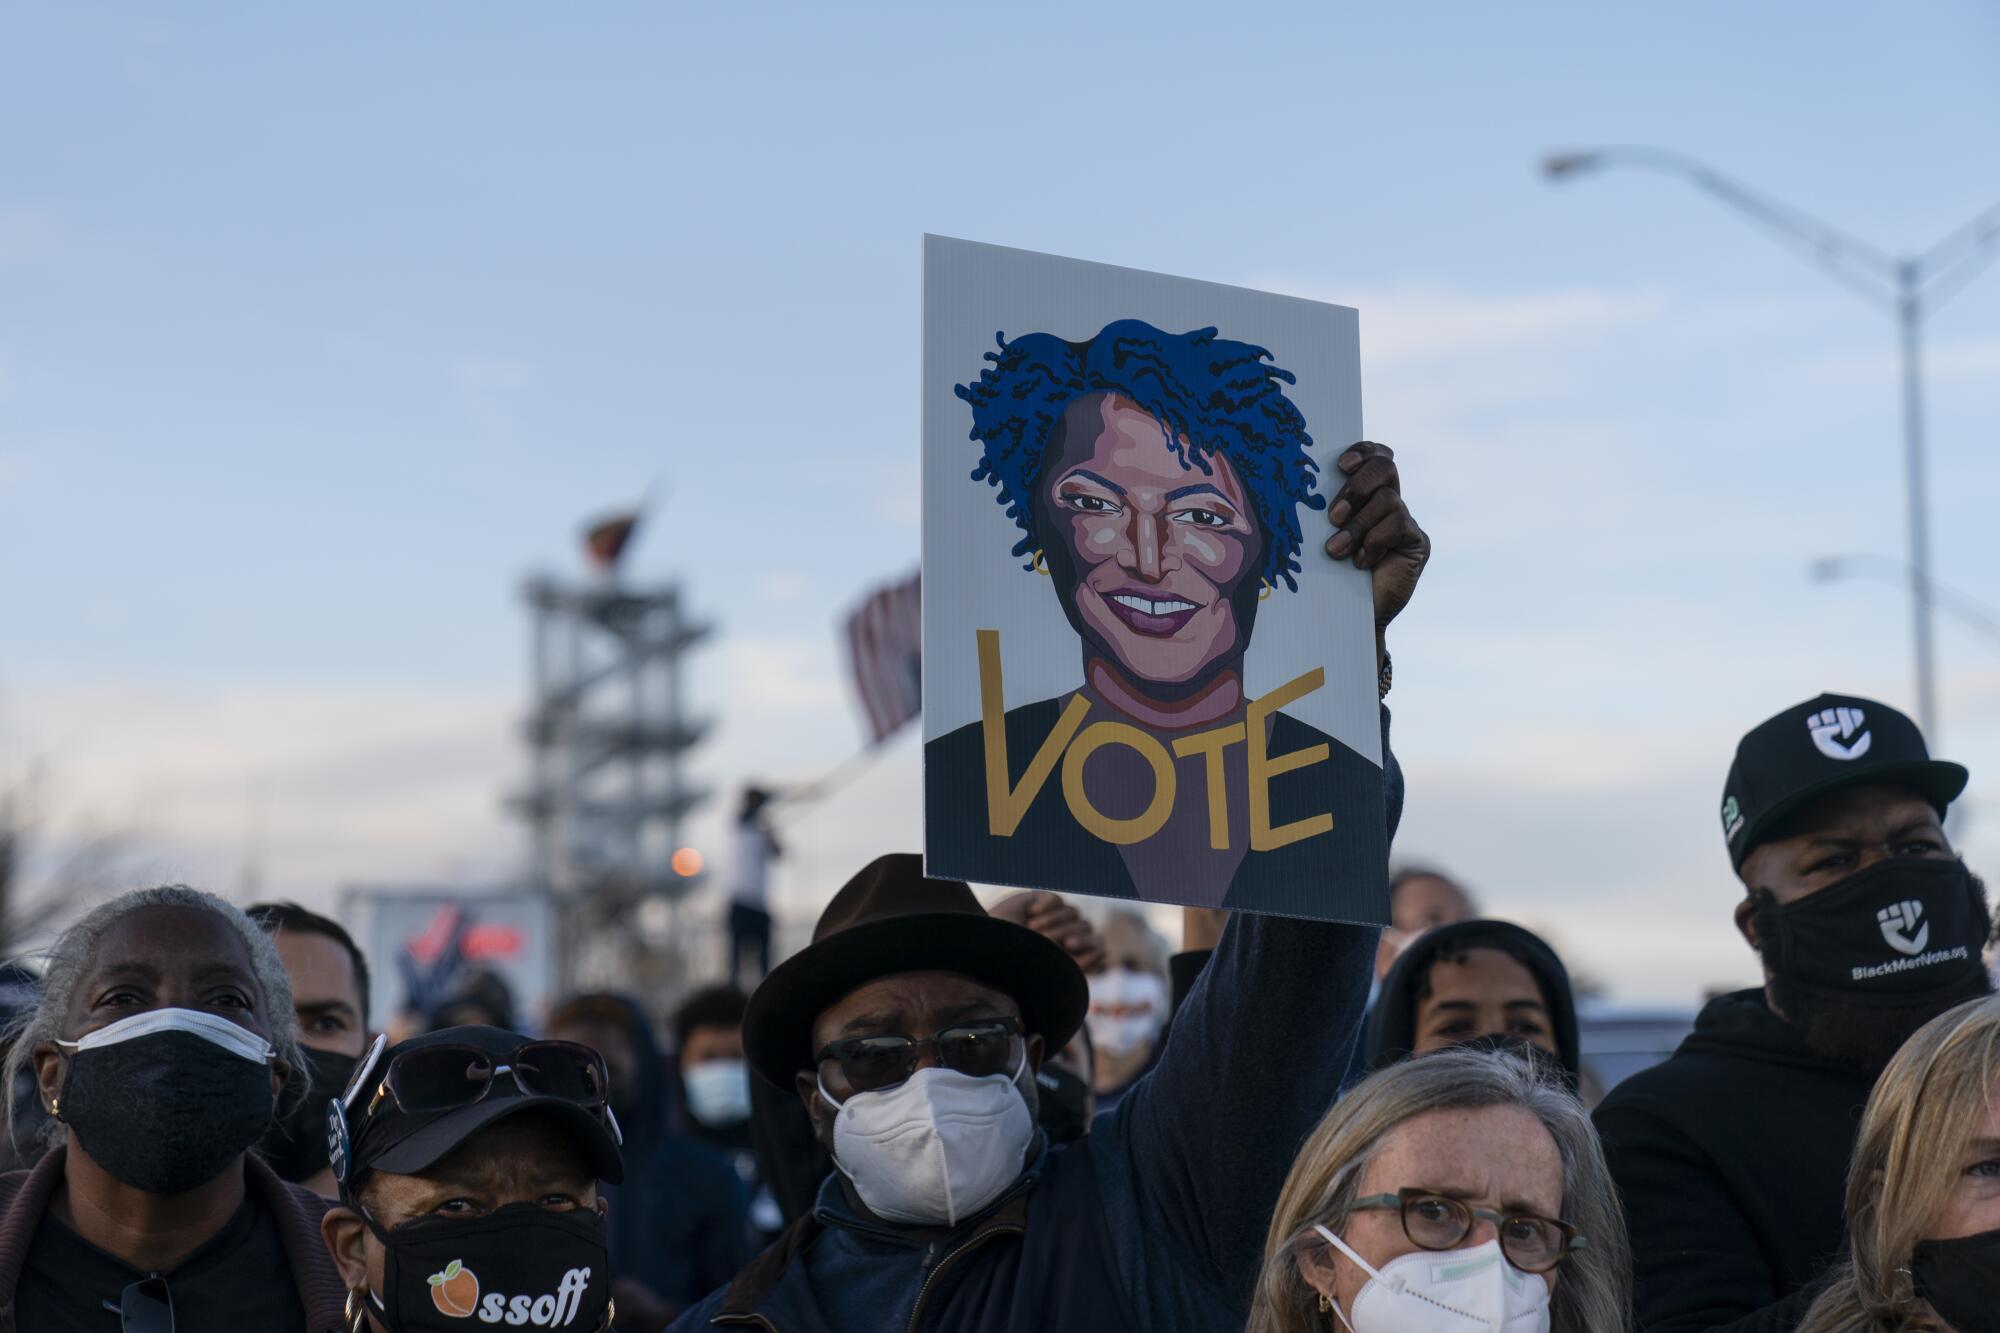 A man in a crowd of people wearing masks holds up an illustration of Stacey Abrams with the word "Vote."